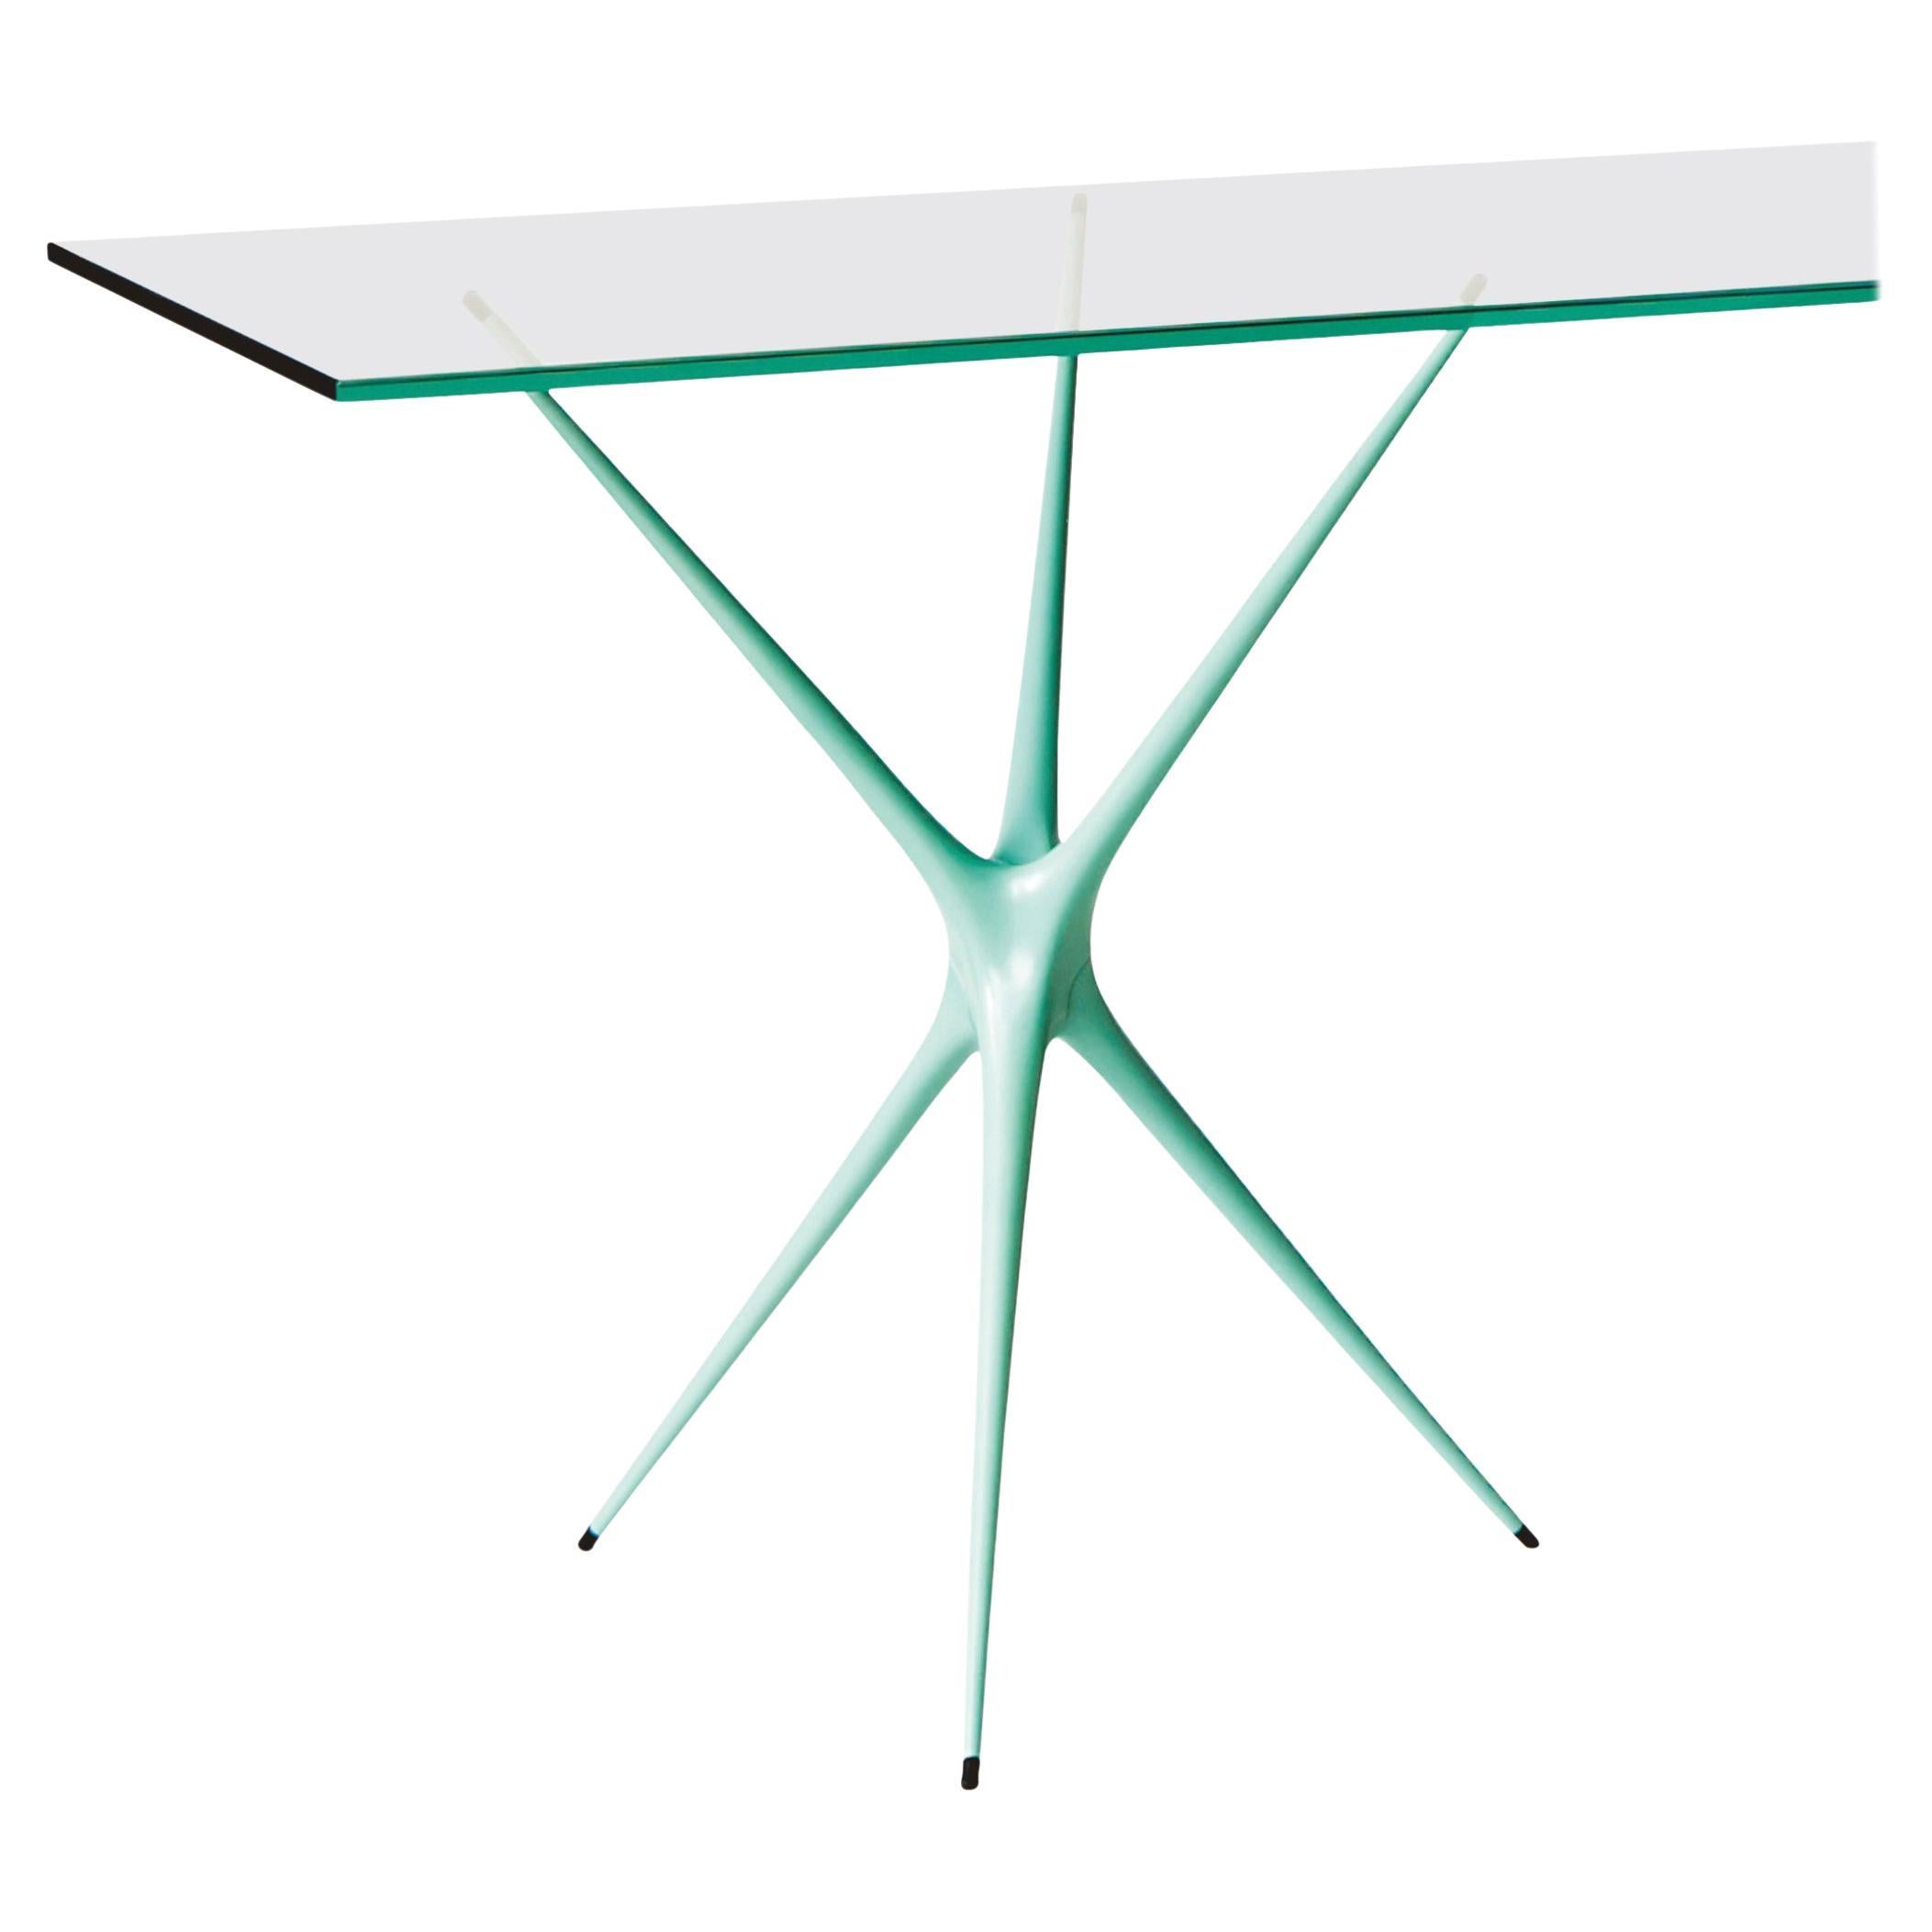 Supernova, Recycled Cast Aluminum Table Leg in Seagreen by Made in Ratio For Sale